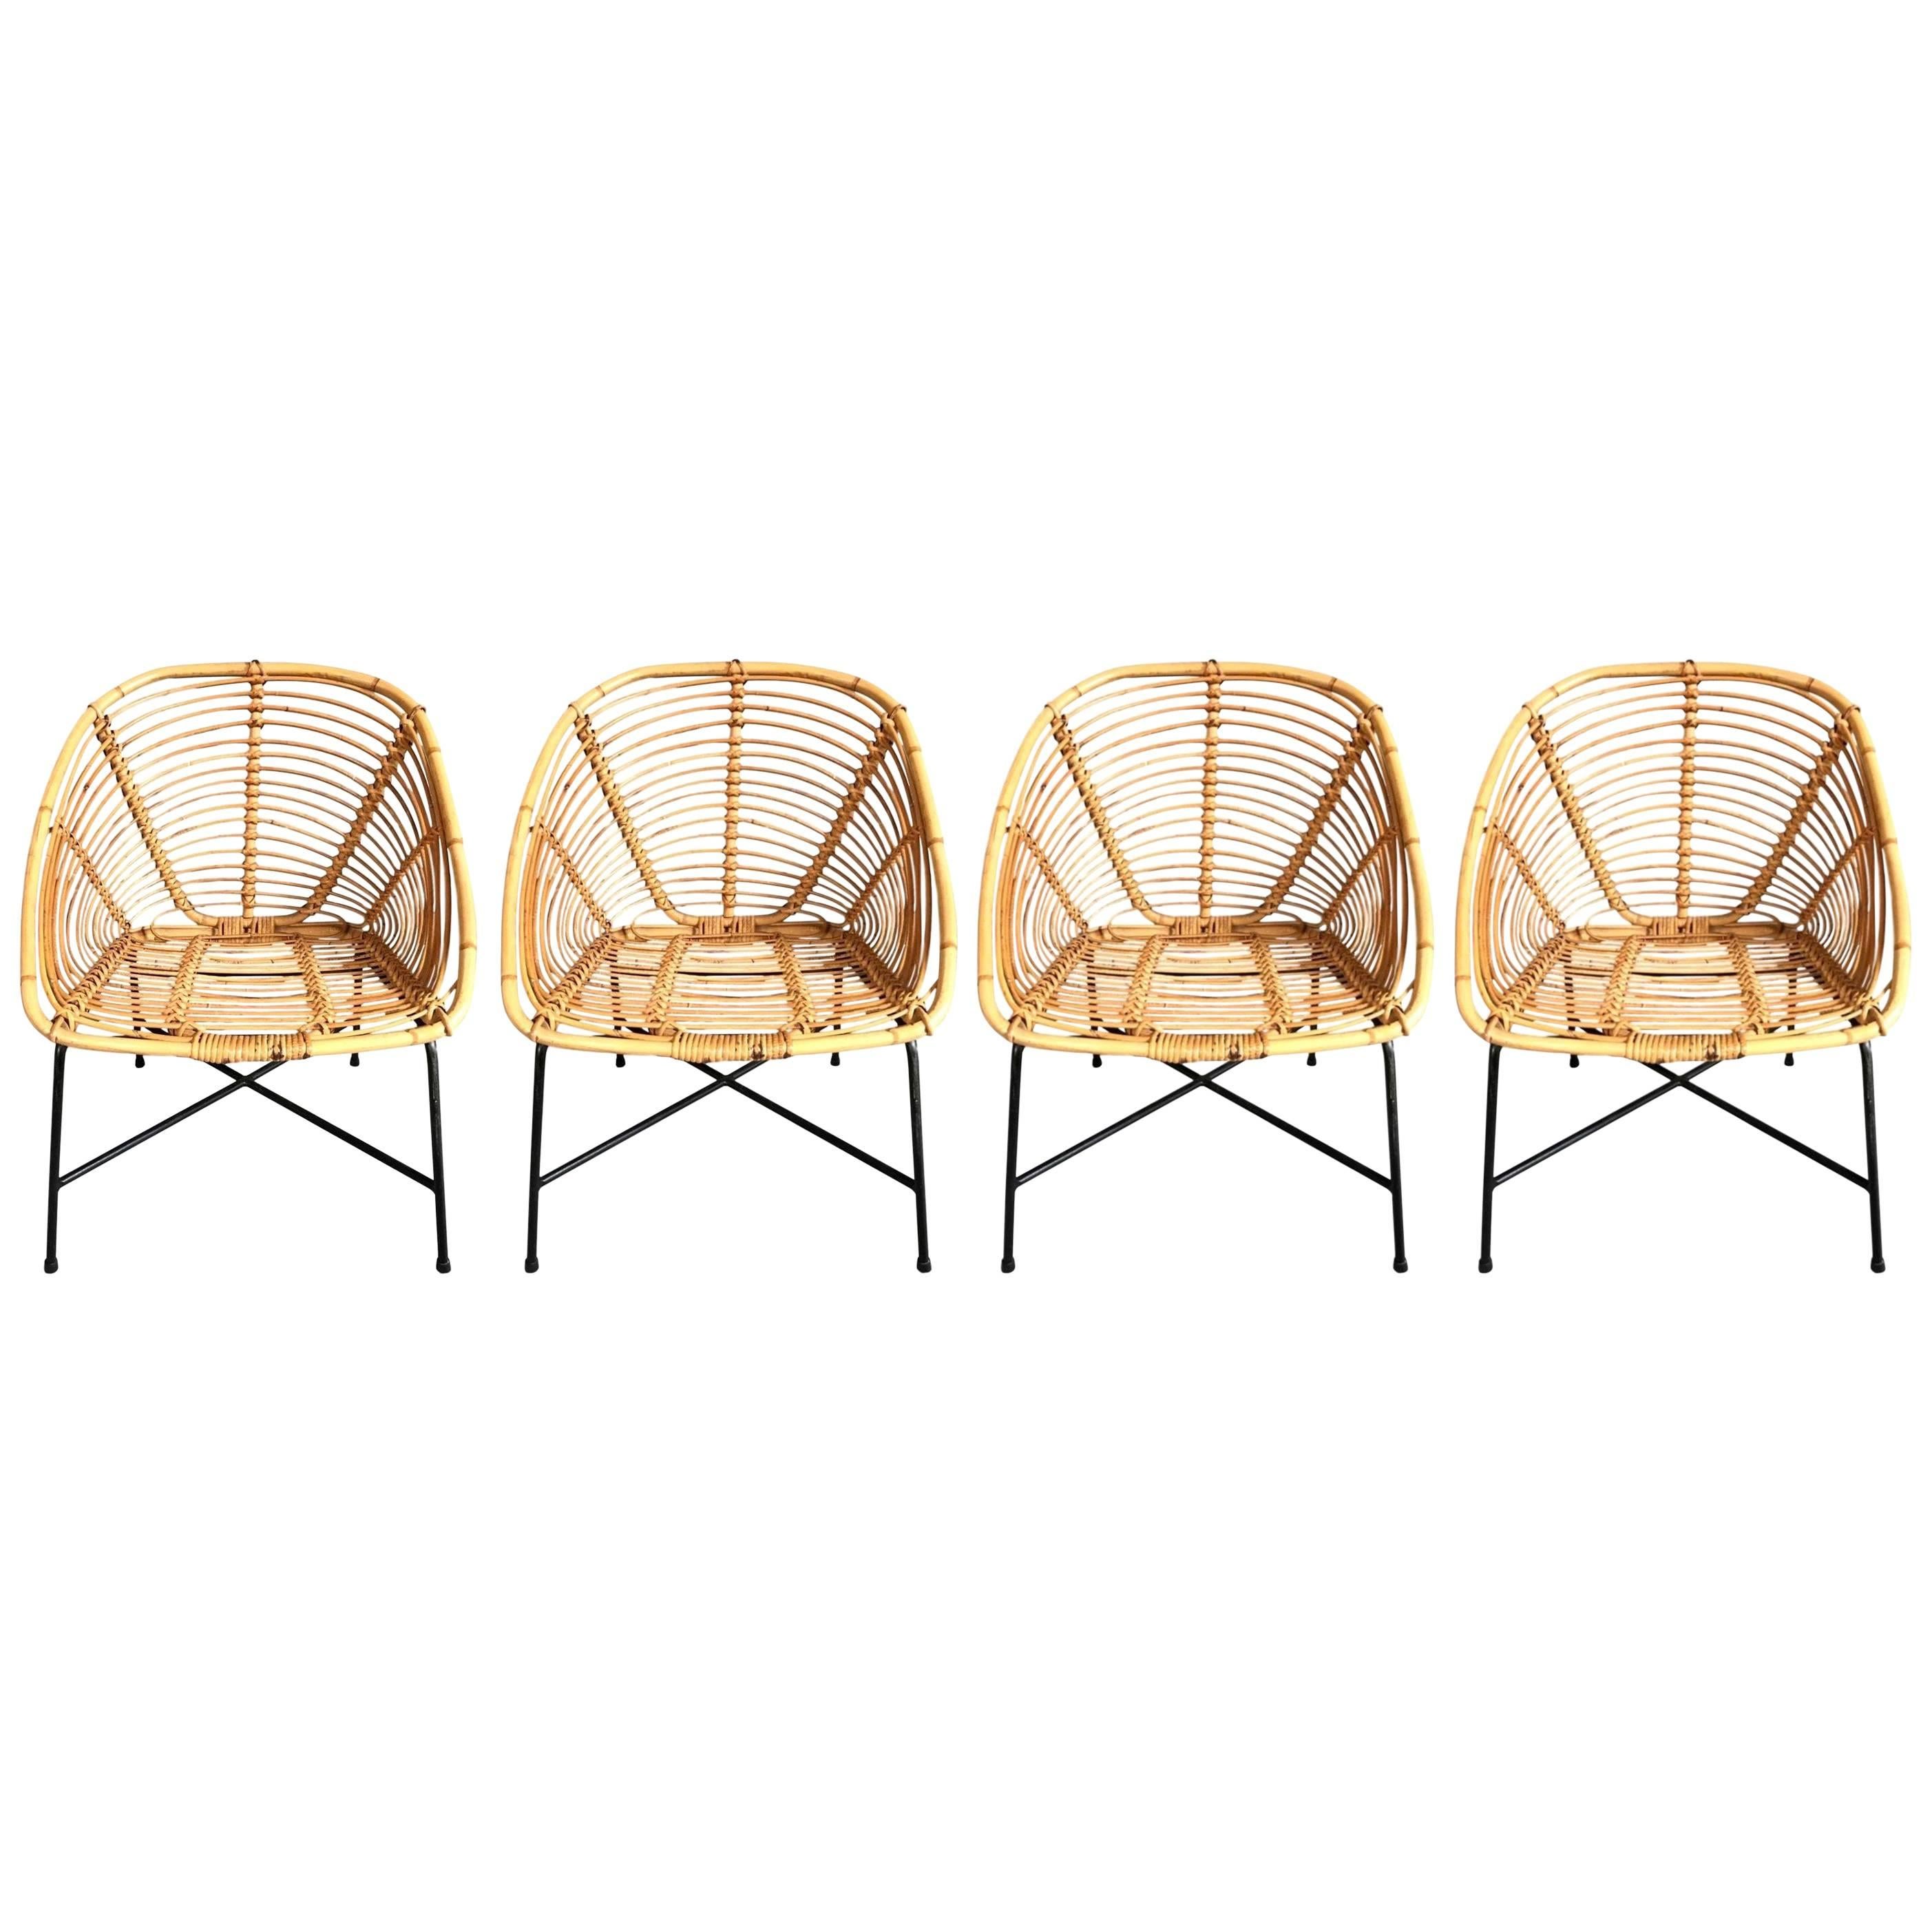 Set of Four Vintage French Wicker and Rattan Chairs